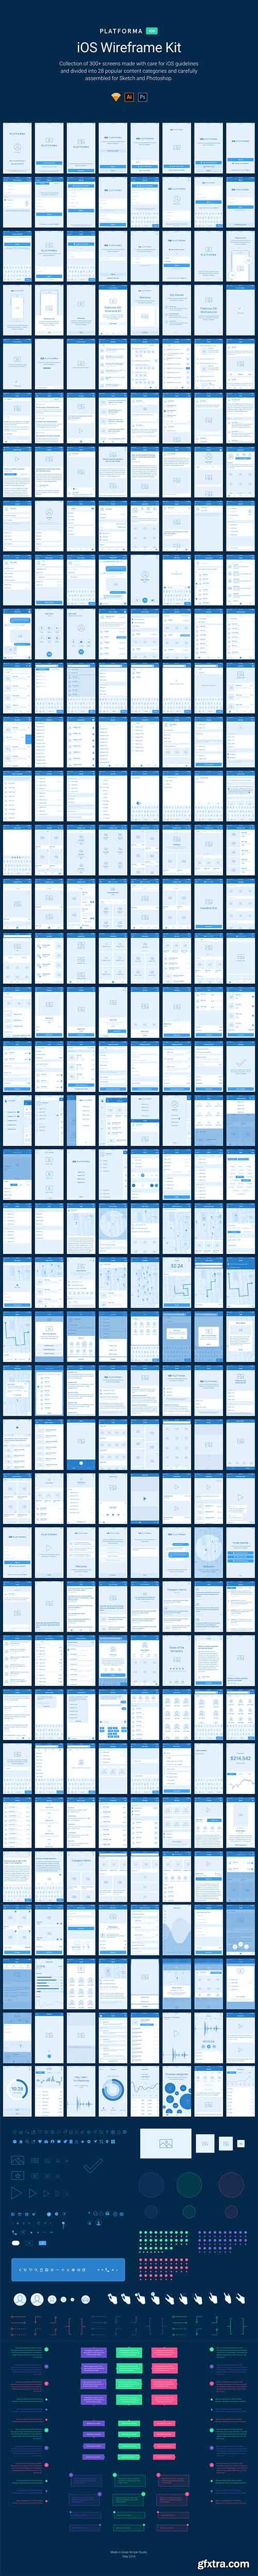 Platforma for iOS - Ultimate wireframe kit for app prototyping